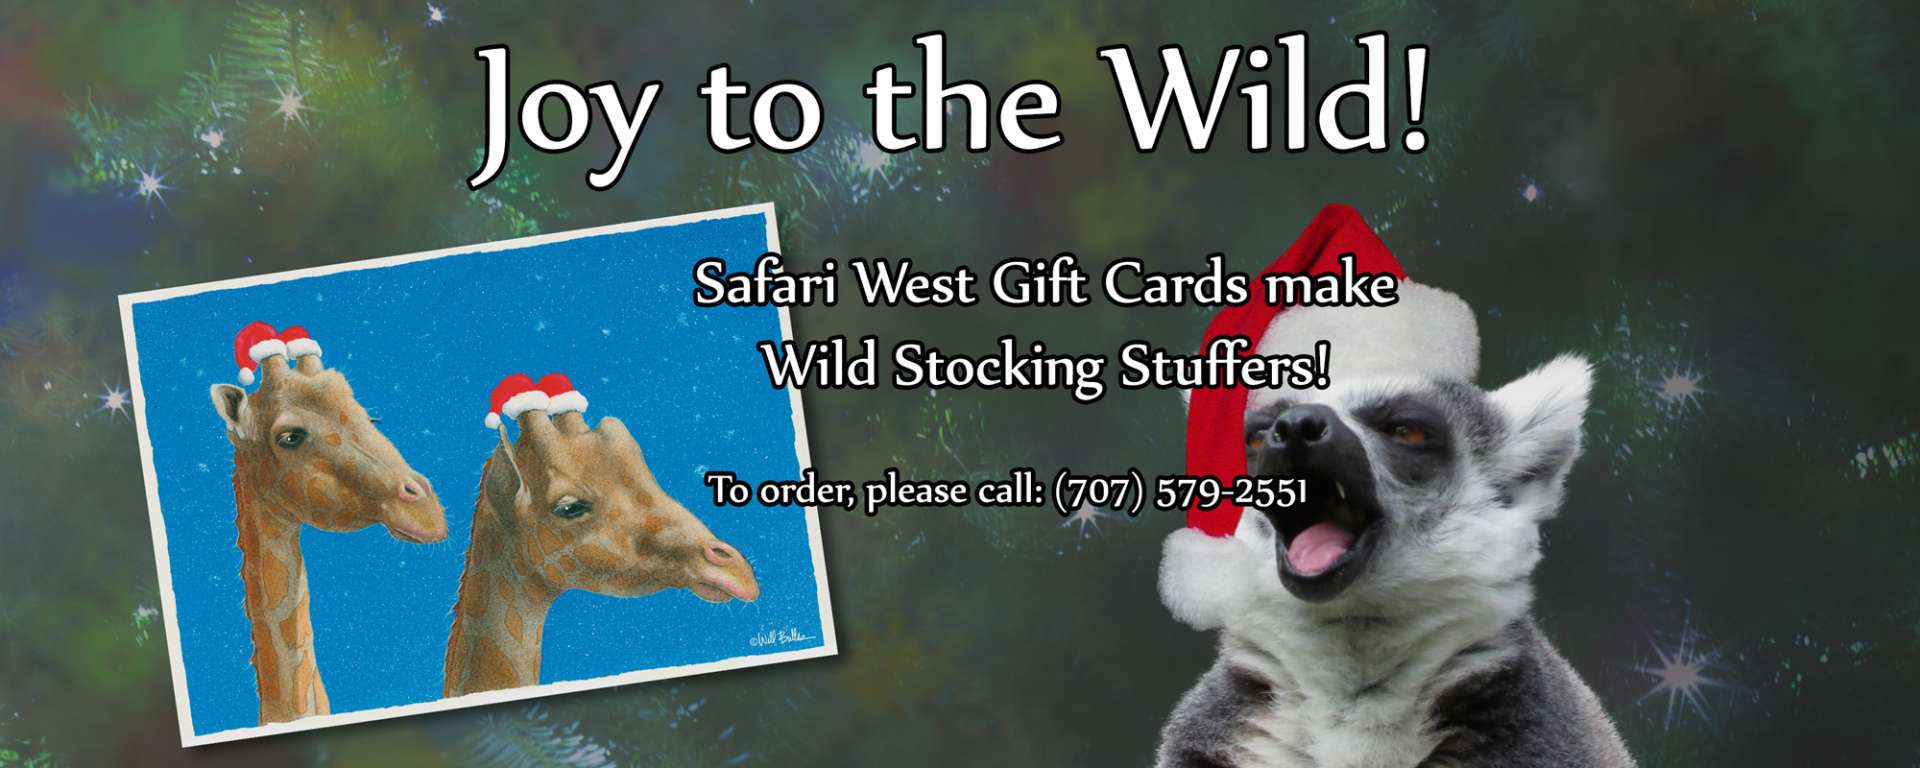 Wild Gift Cards